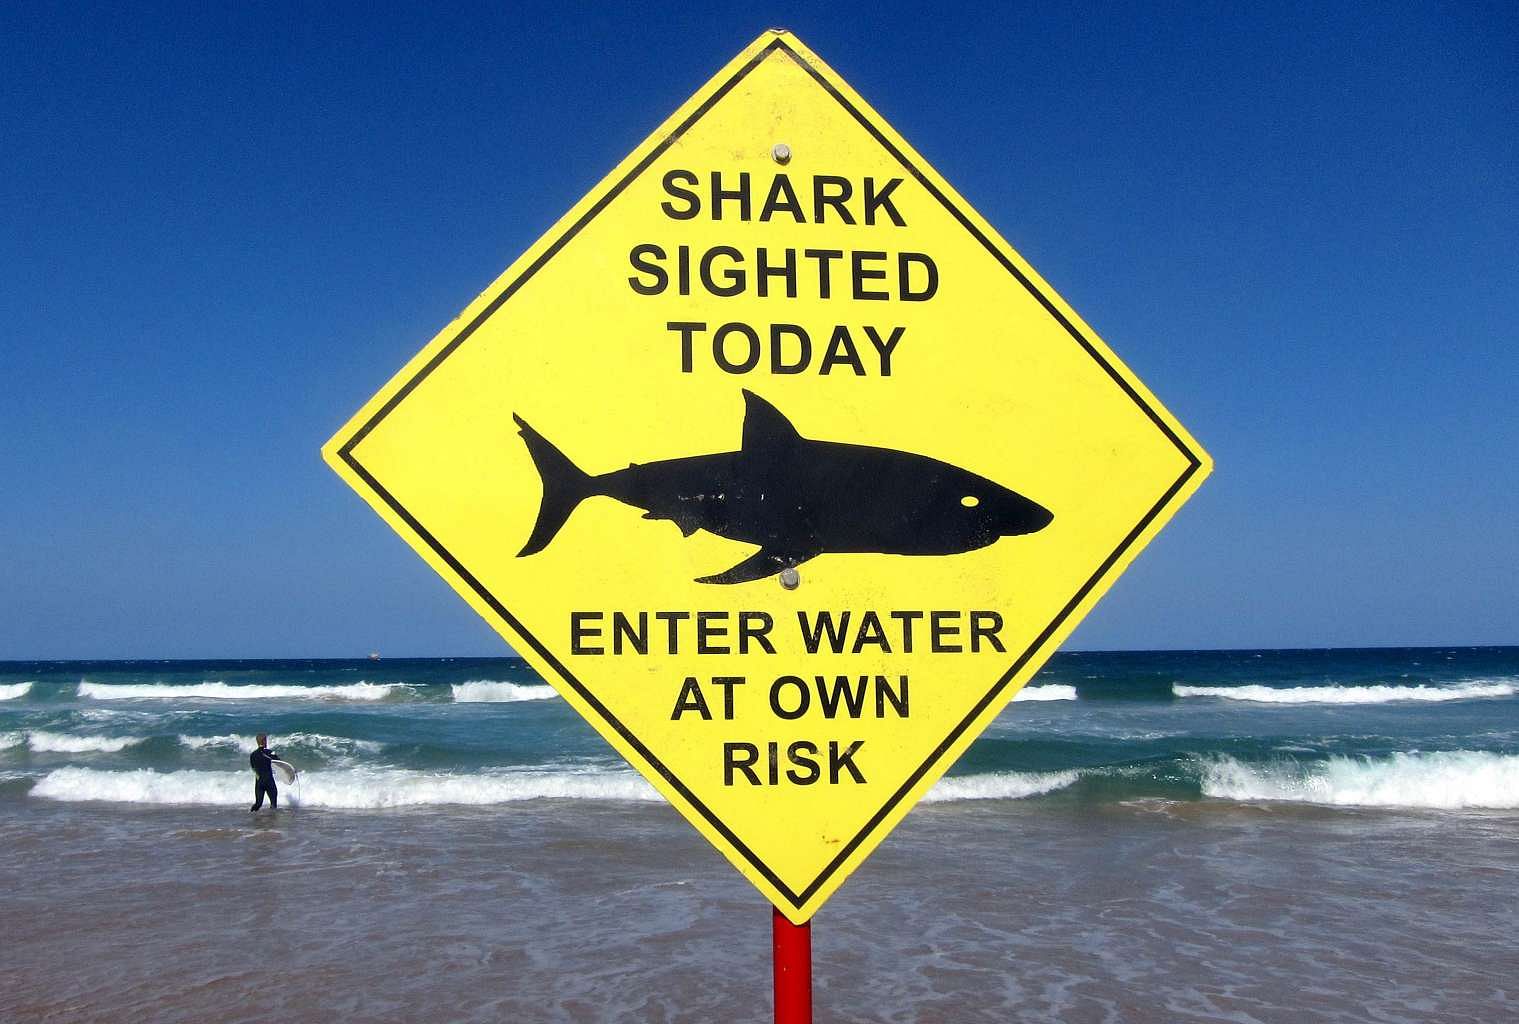 World S Most Shark Infested Areas And How To Stay Safe From Shark Attacks World News Top Stories The Straits Times